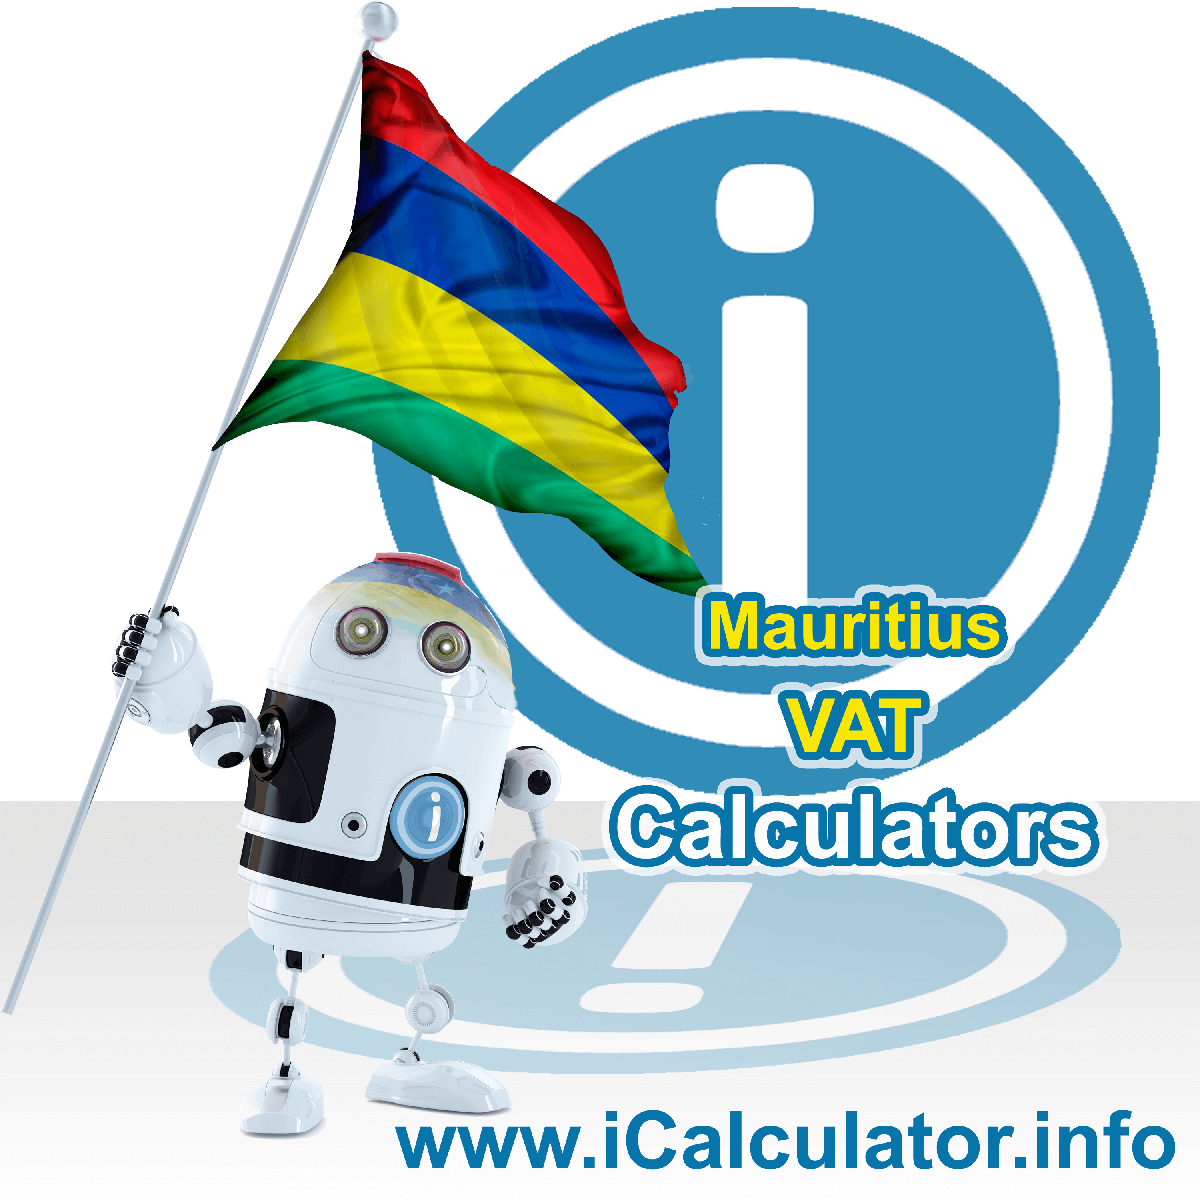 Mauritius VAT Calculator. This image shows the Mauritius flag and information relating to the VAT formula used for calculating Value Added Tax in Mauritius using the Mauritius VAT Calculator in 2024